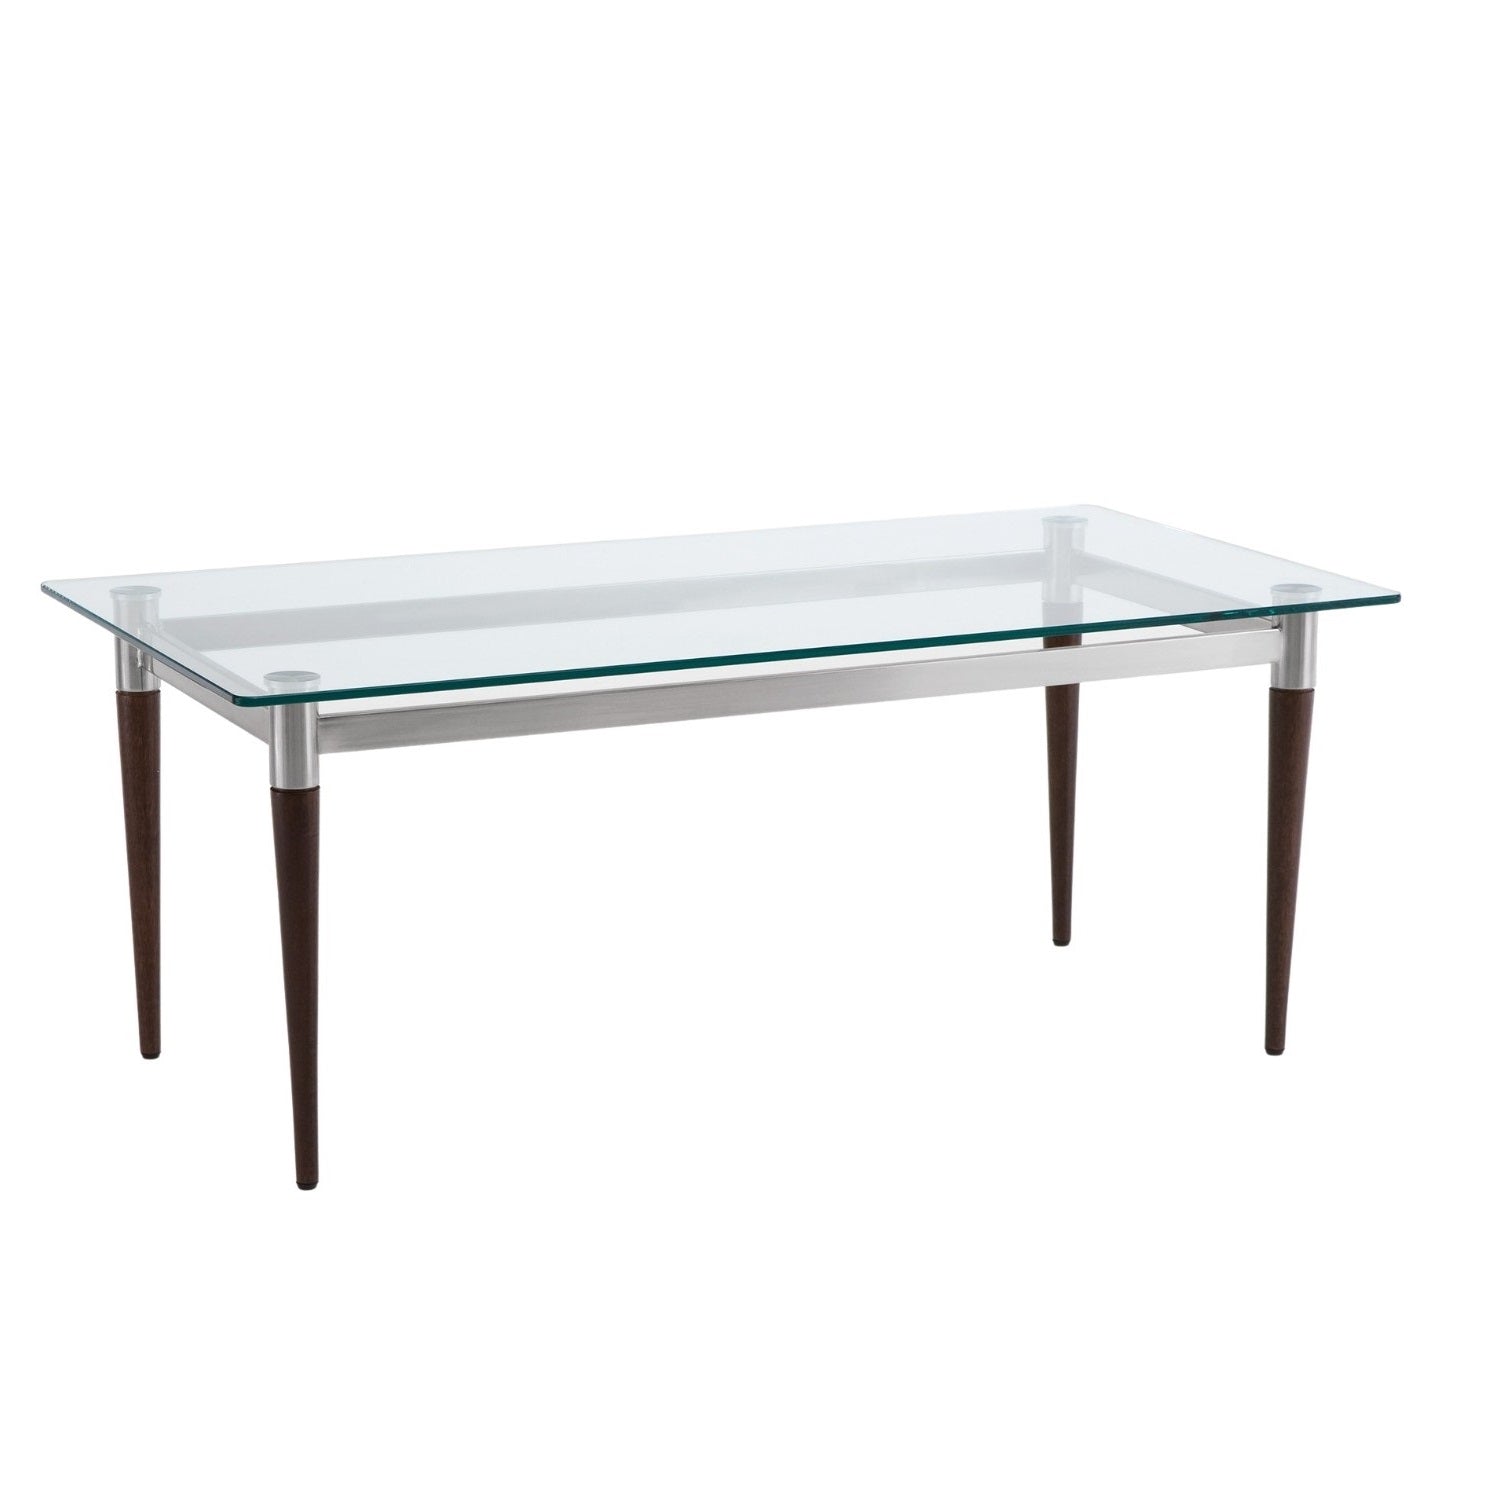 Siena Collection Coffee Table with Glass Top, FREE SHIPPING